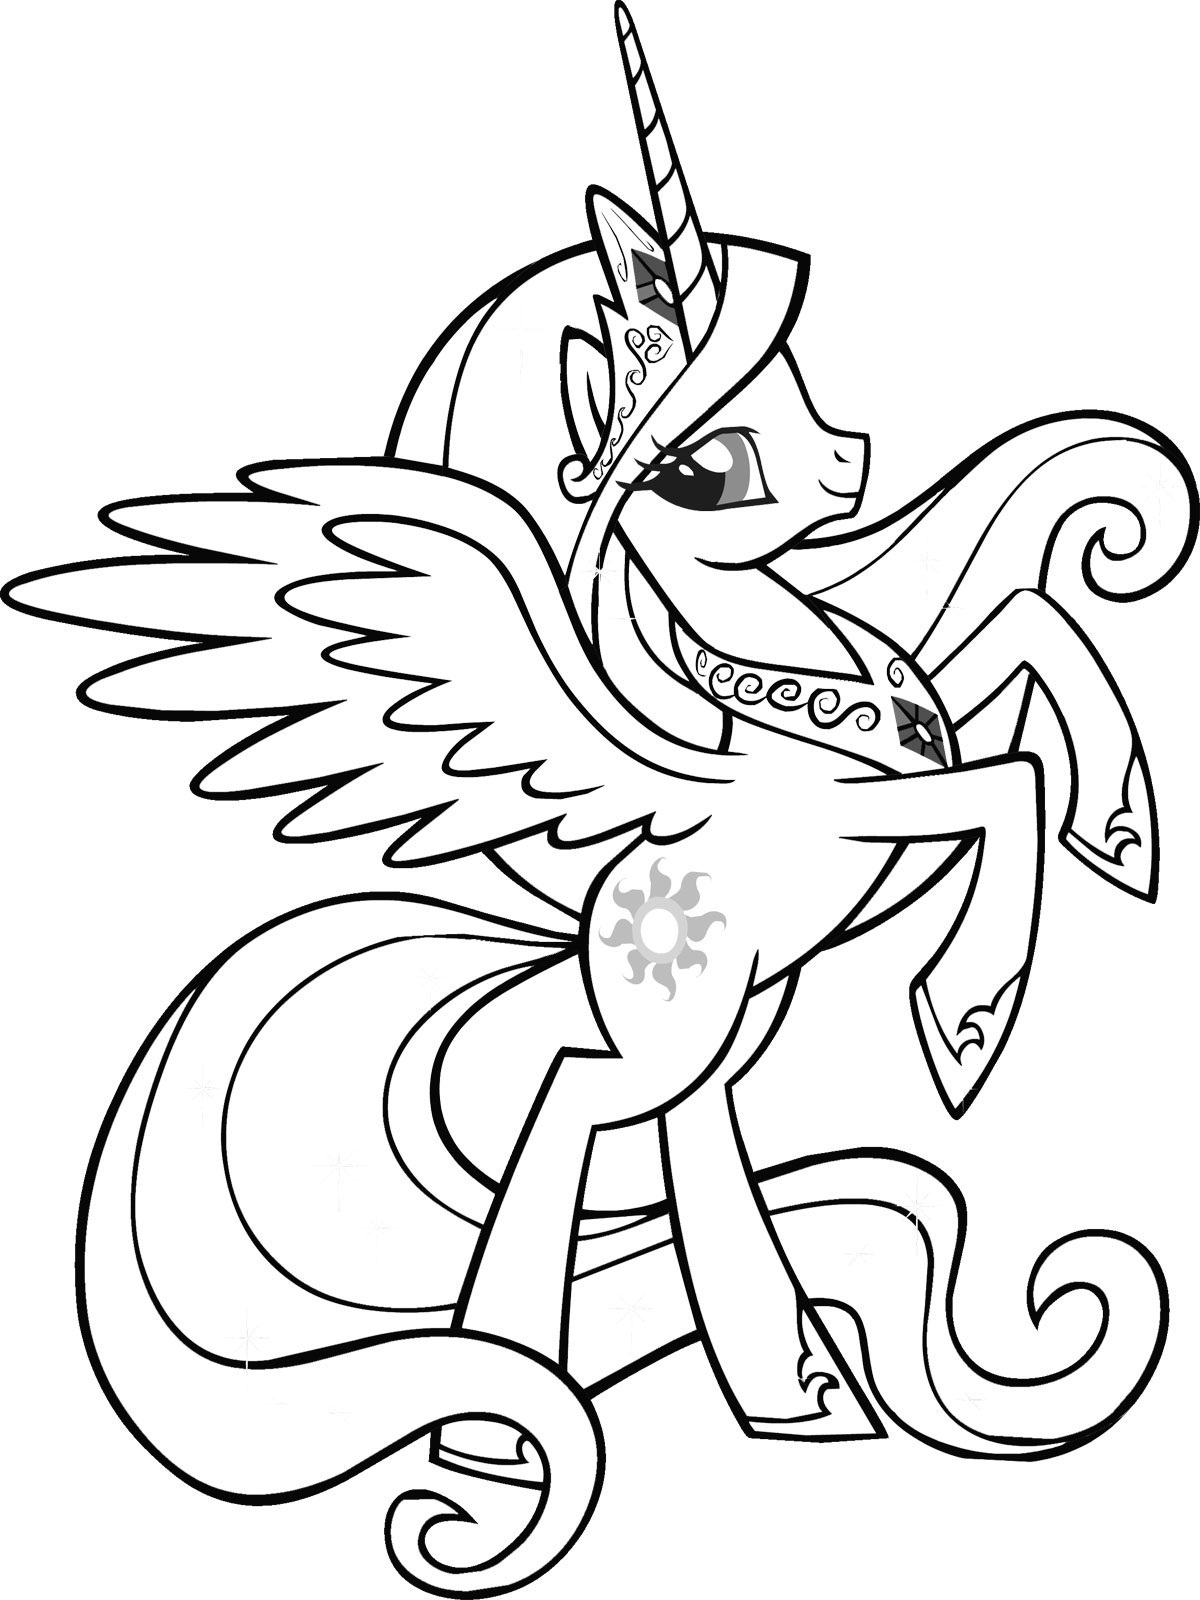 950 Top Free Printable Coloring Pages My Little Pony Download Free Images